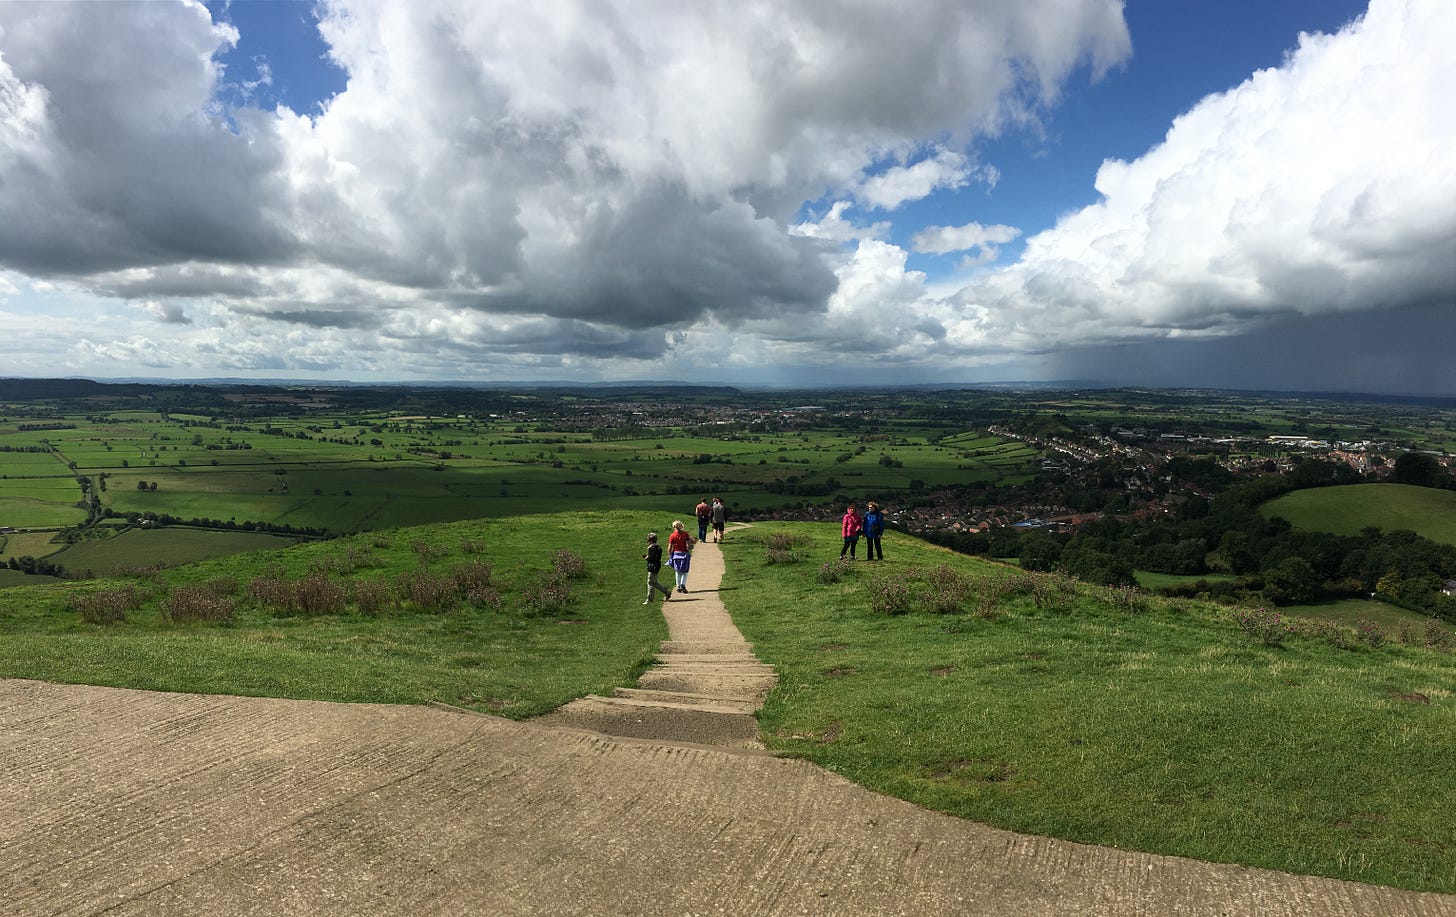 Partly cloudy sky over a vast expanse of green. A dirt path cuts down a hill in the center of the image, toward towns and houses below. A few people are ahead on the path.